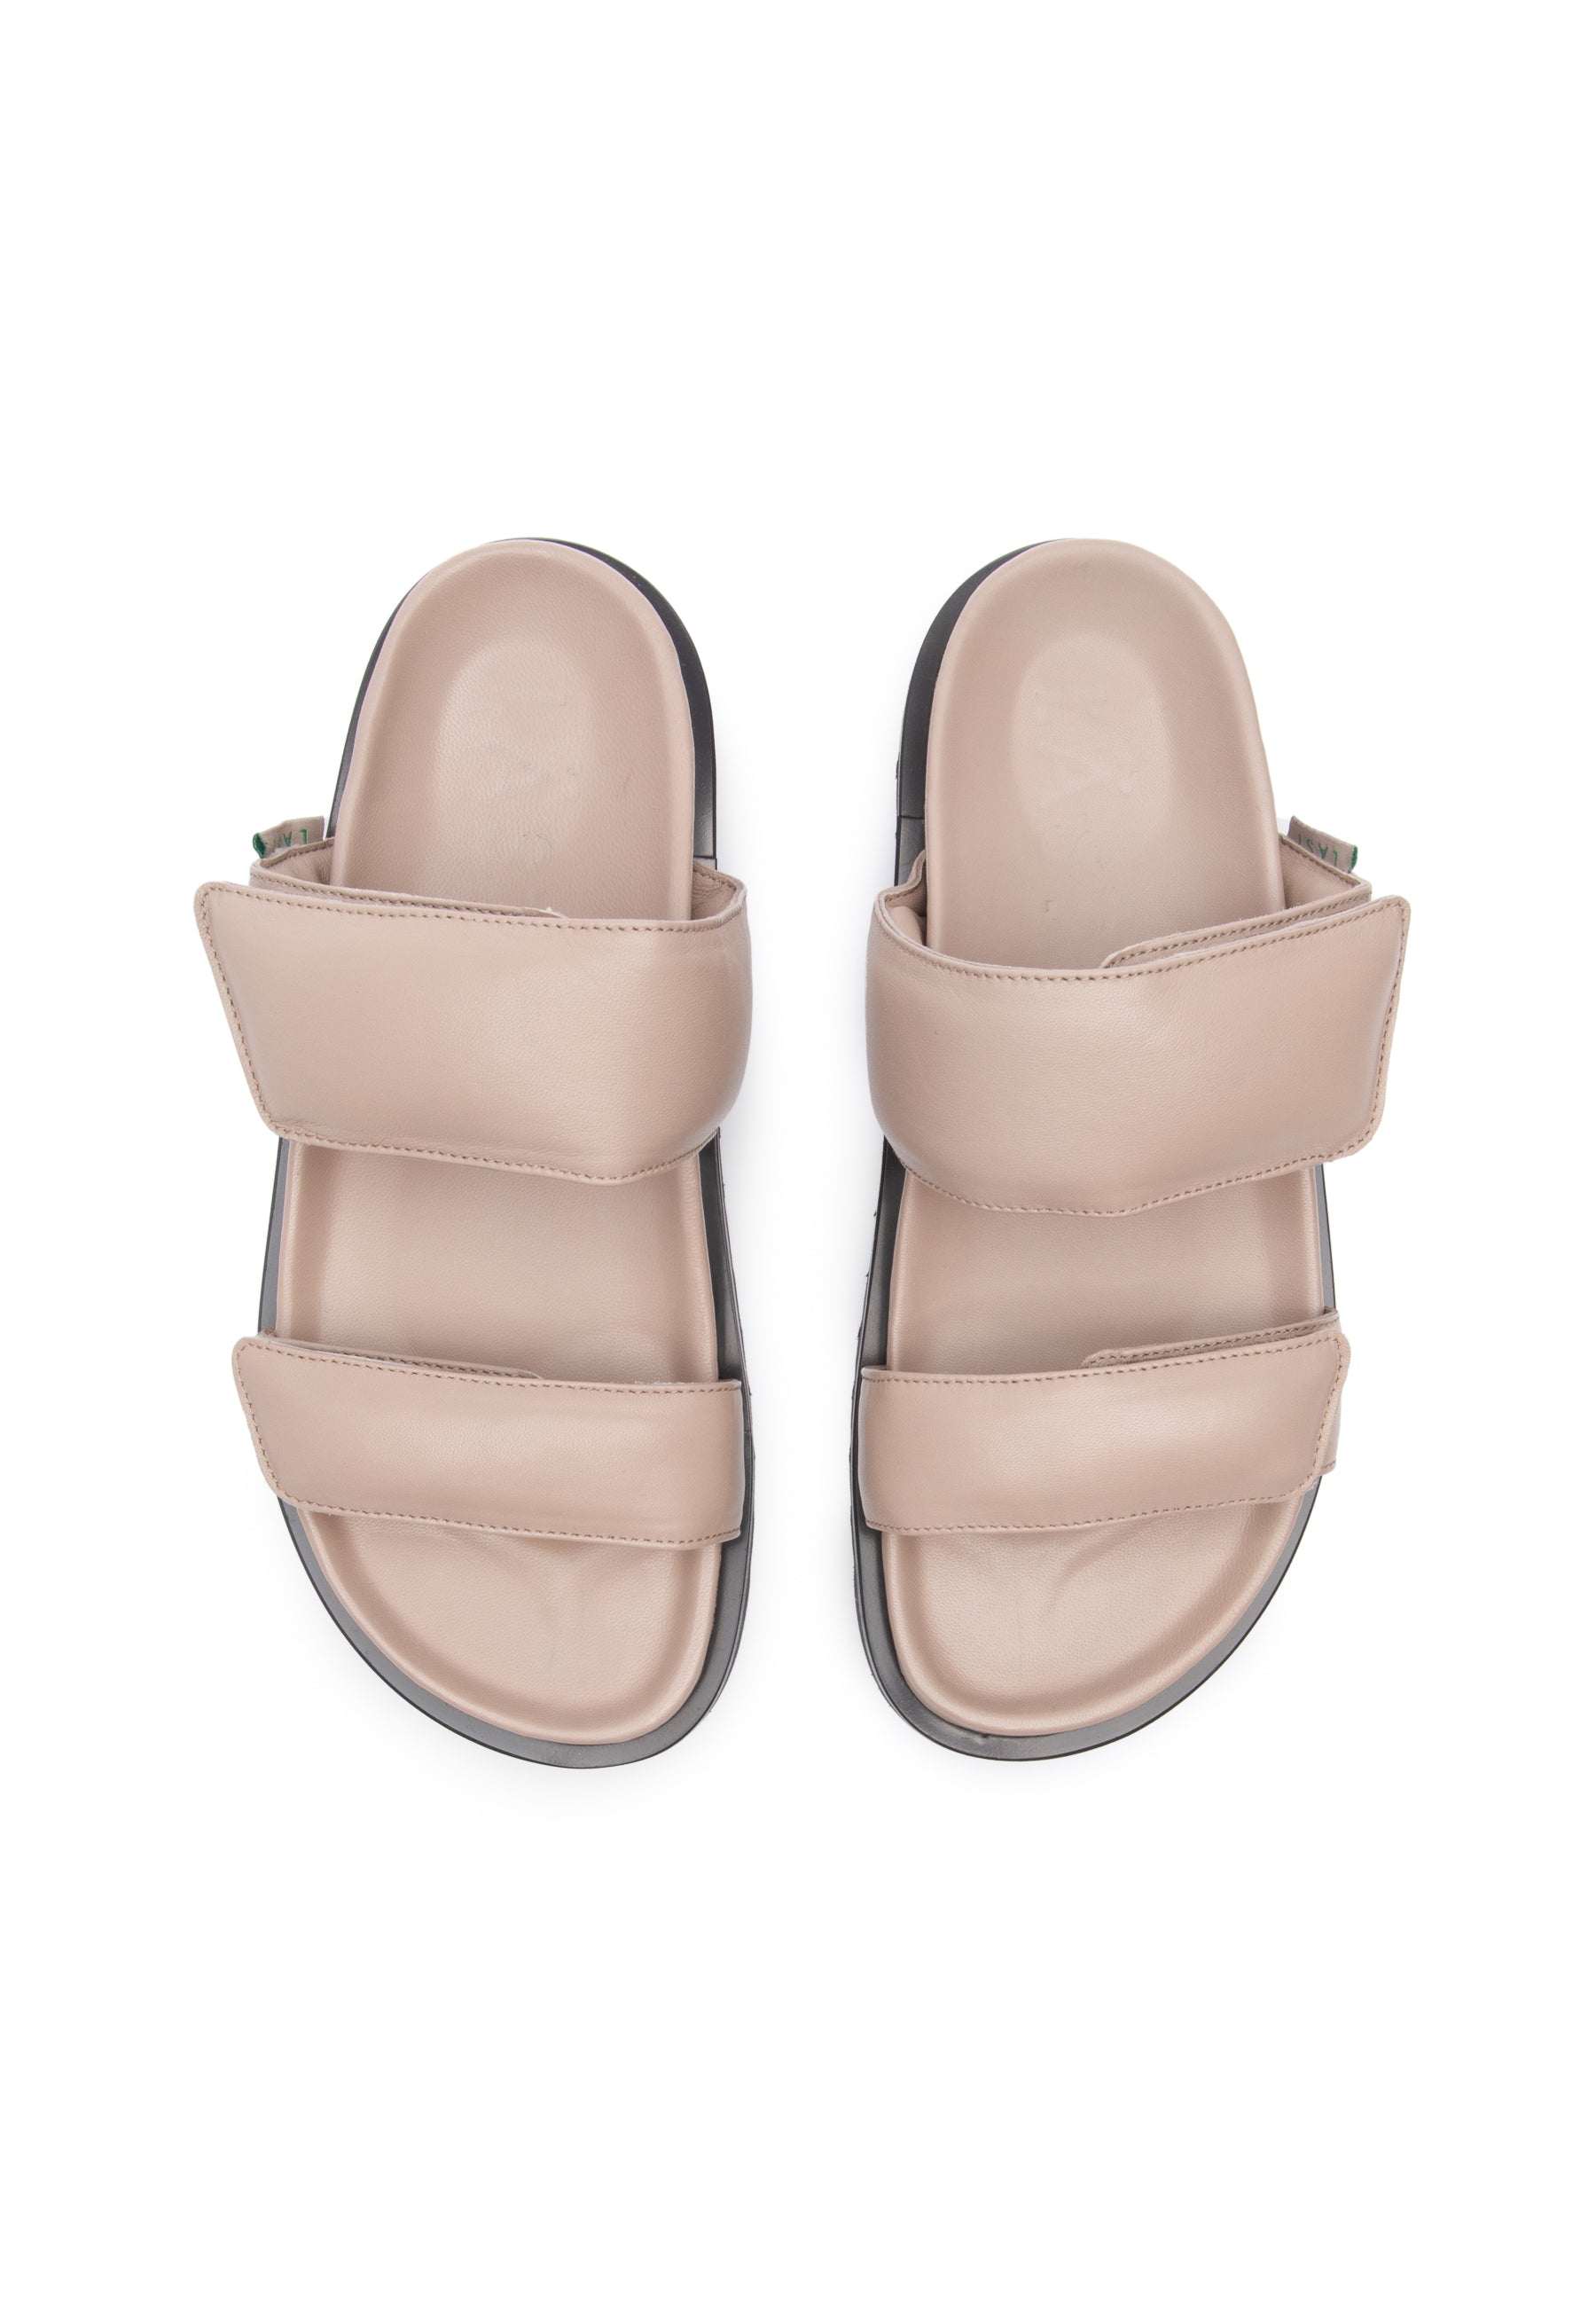 Corine Taupe Leather Puffy Sandals LAST1514 - 4